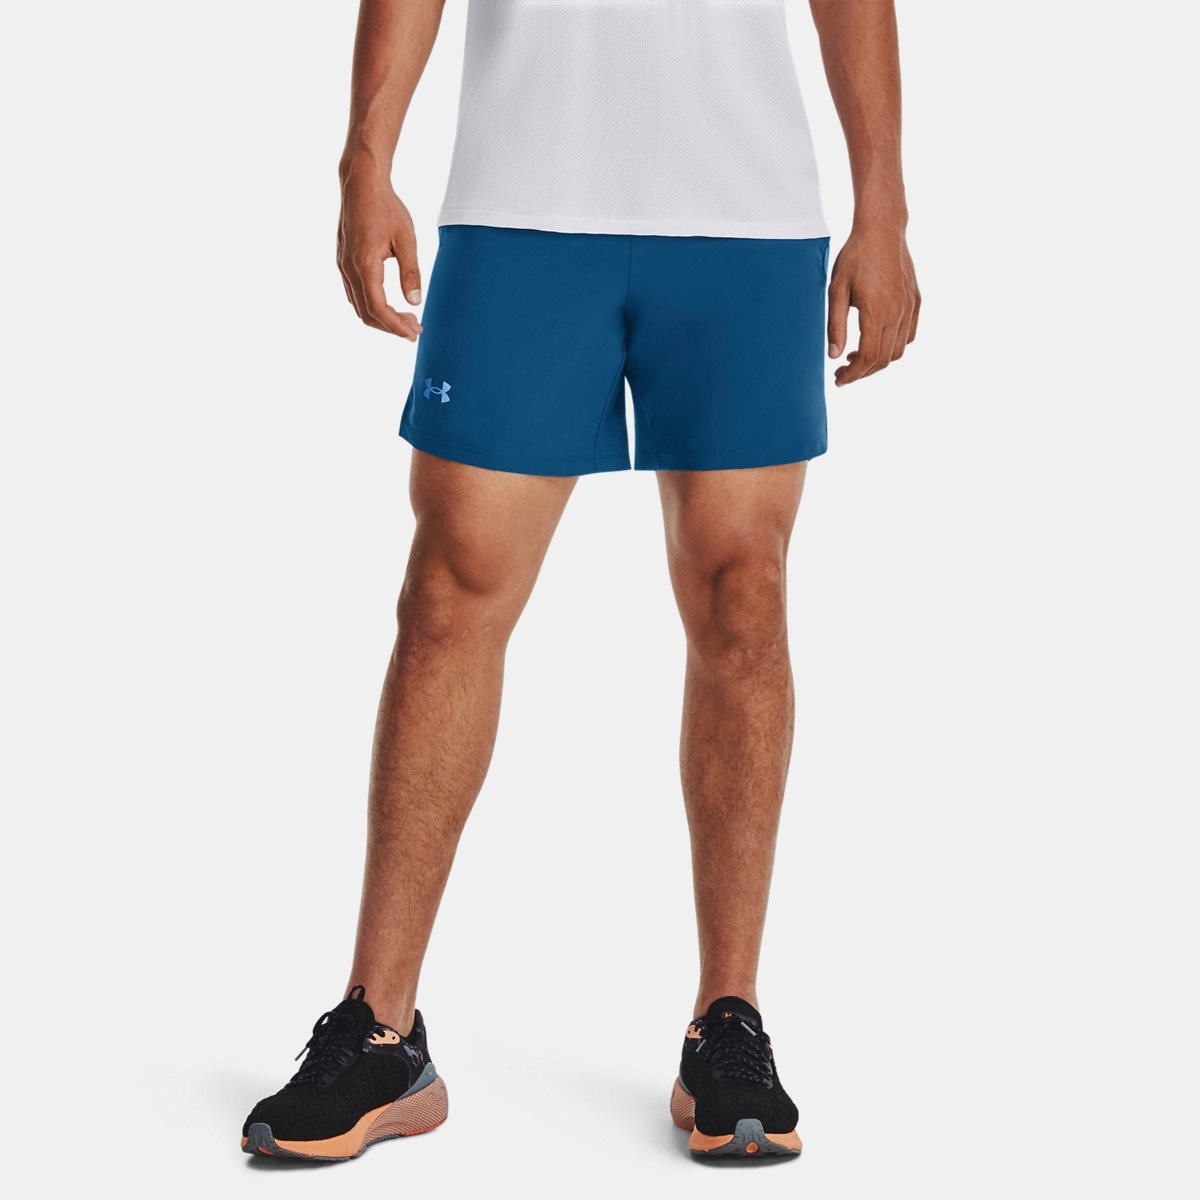 Men's Shorts in Blue at Under Armour GOOFASH